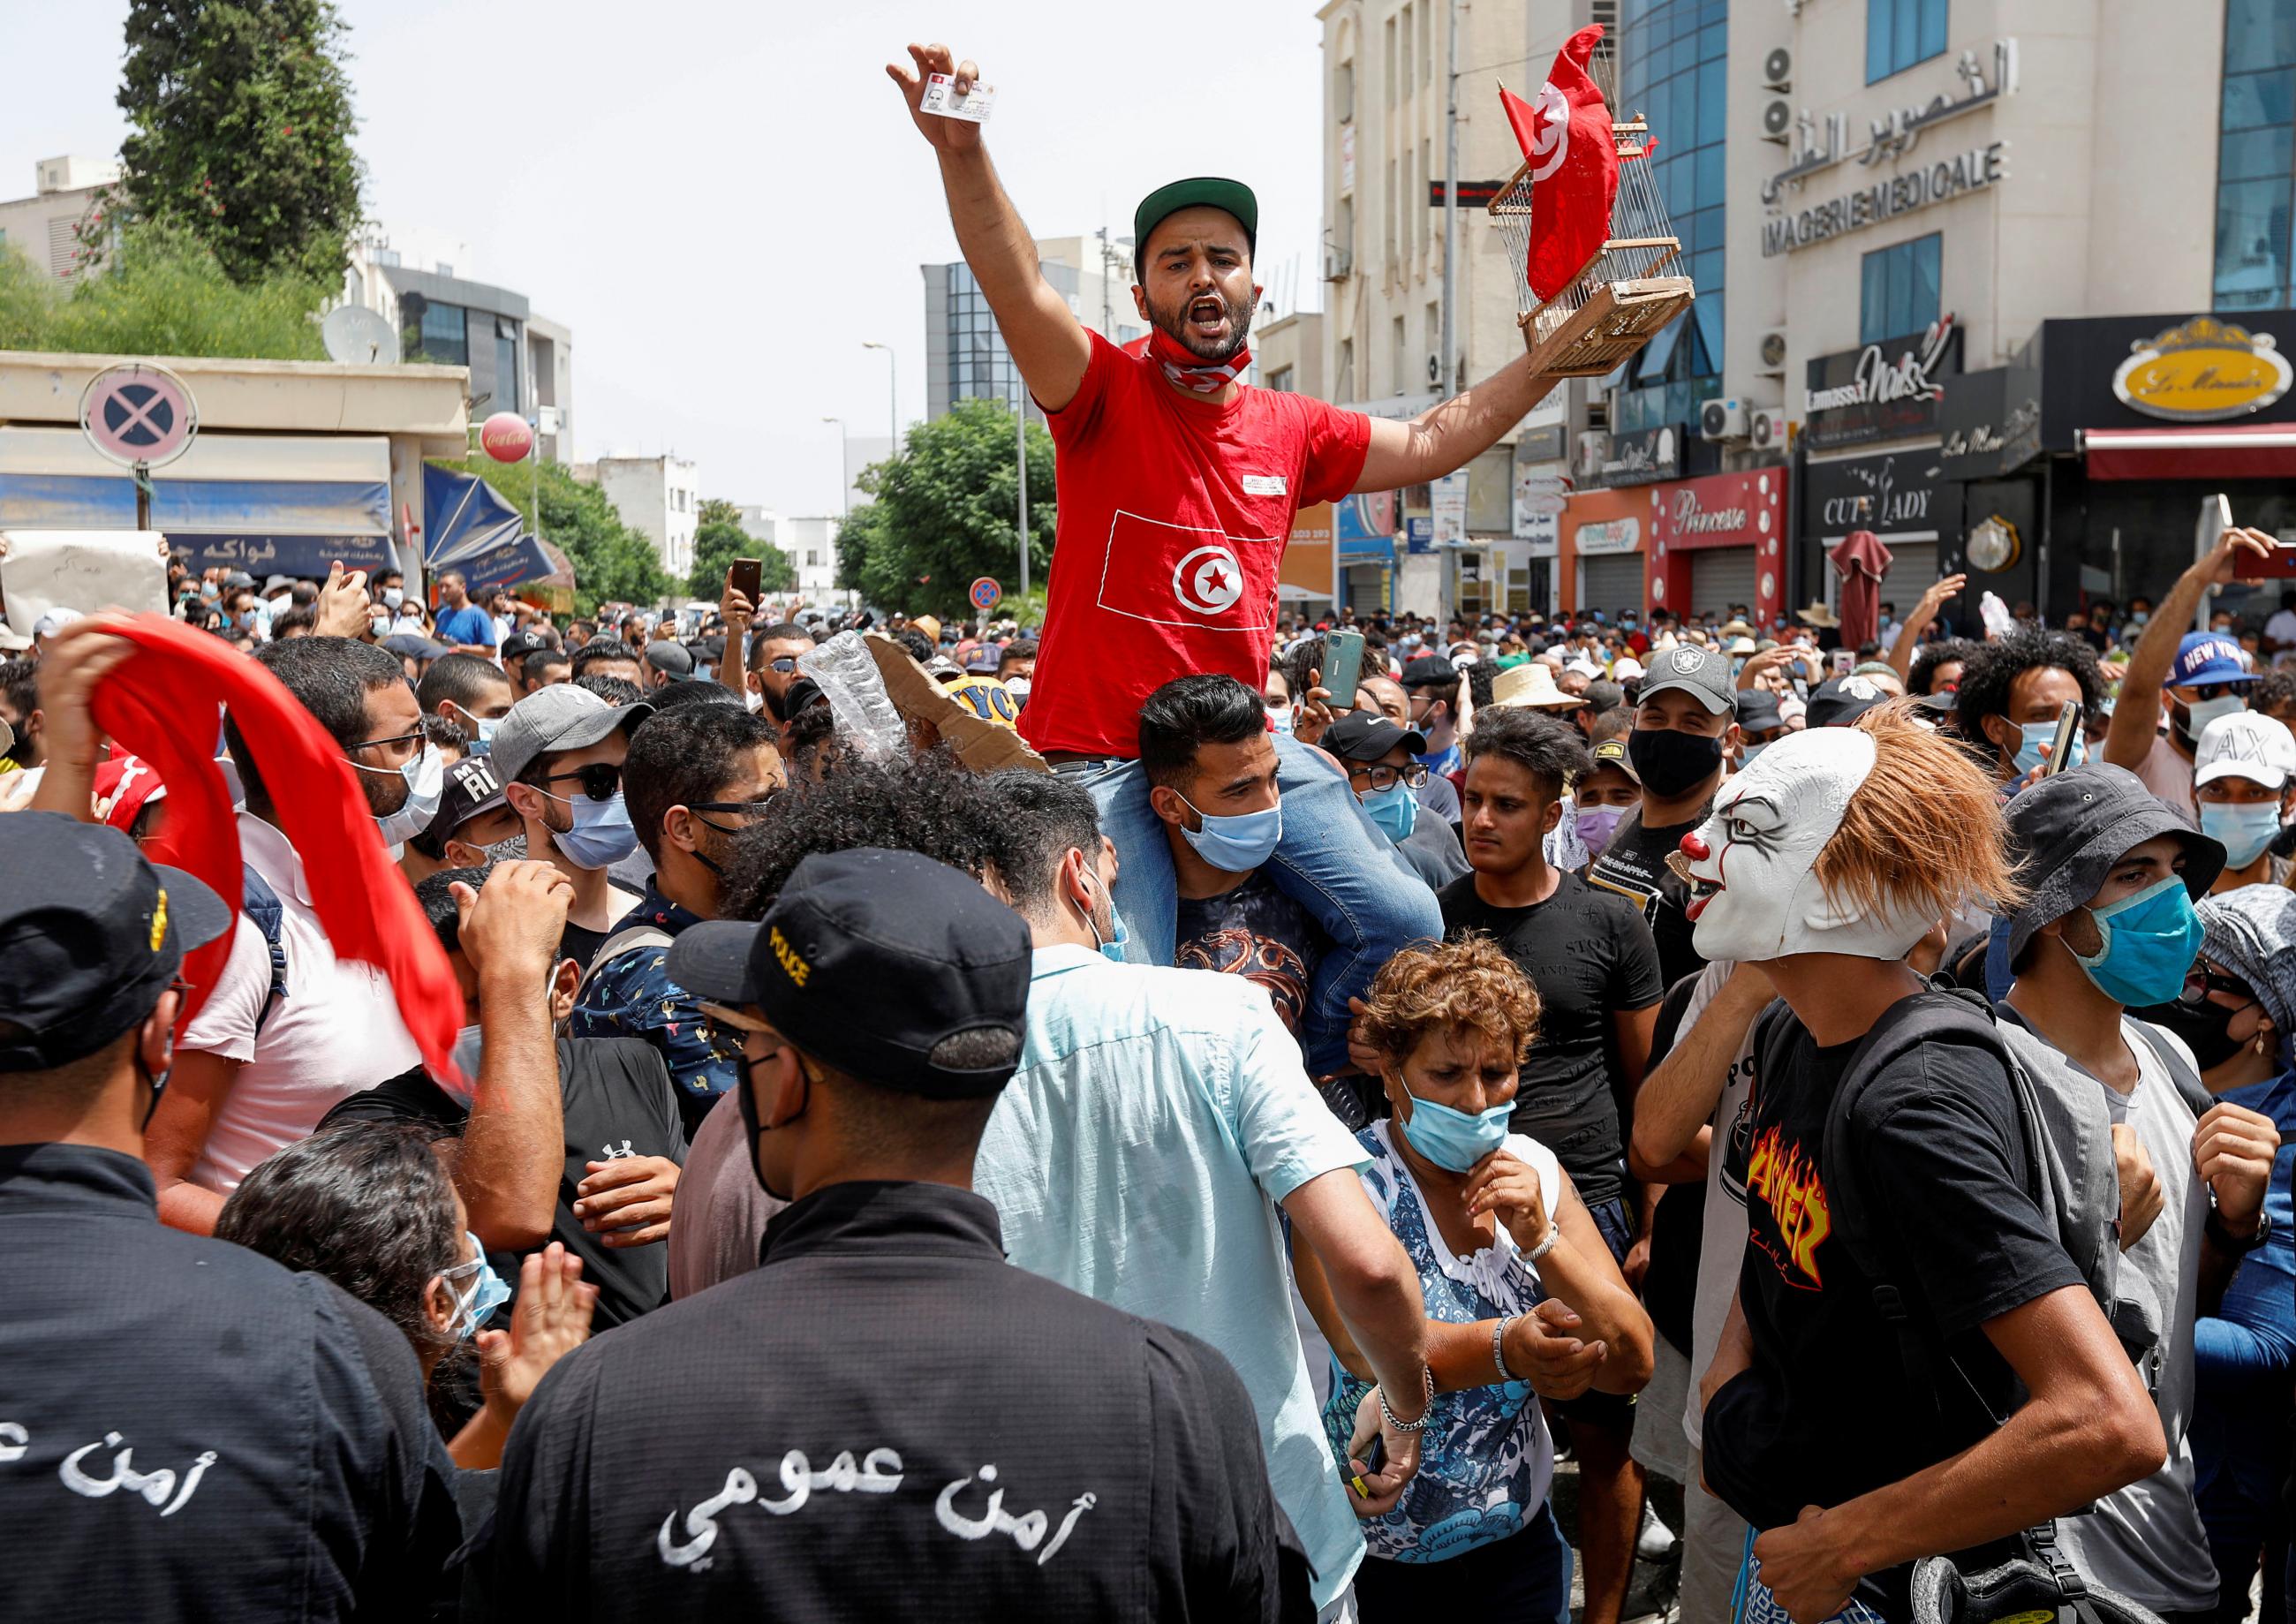 Demonstrators gather in front of police officers standing guard during an anti-government protest in Tunis, Tunisia on July 25, 2021.